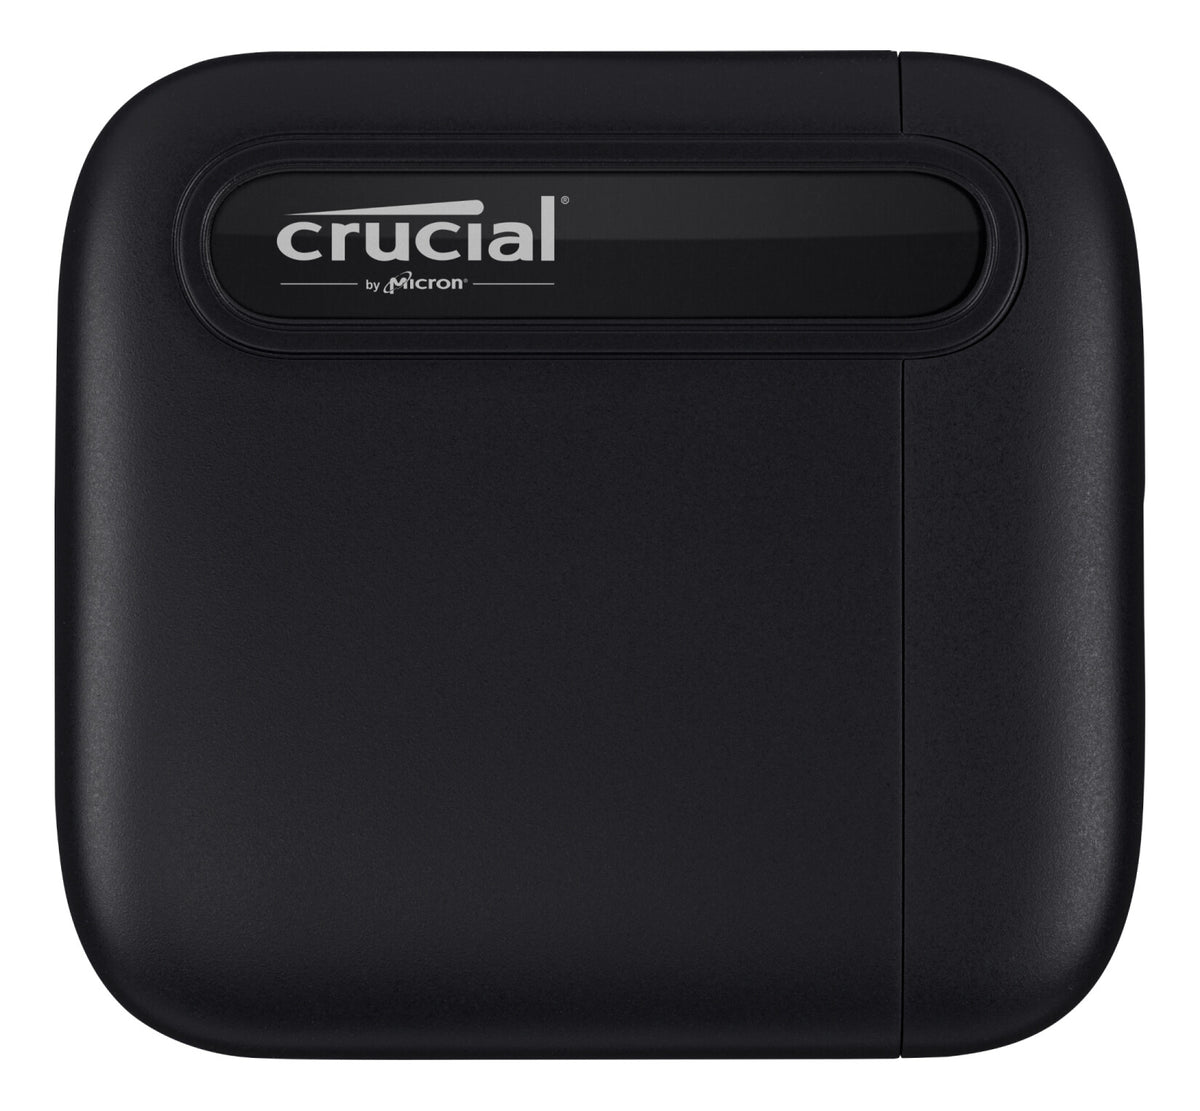 Crucial X6 - External solid state drive - 1 TB